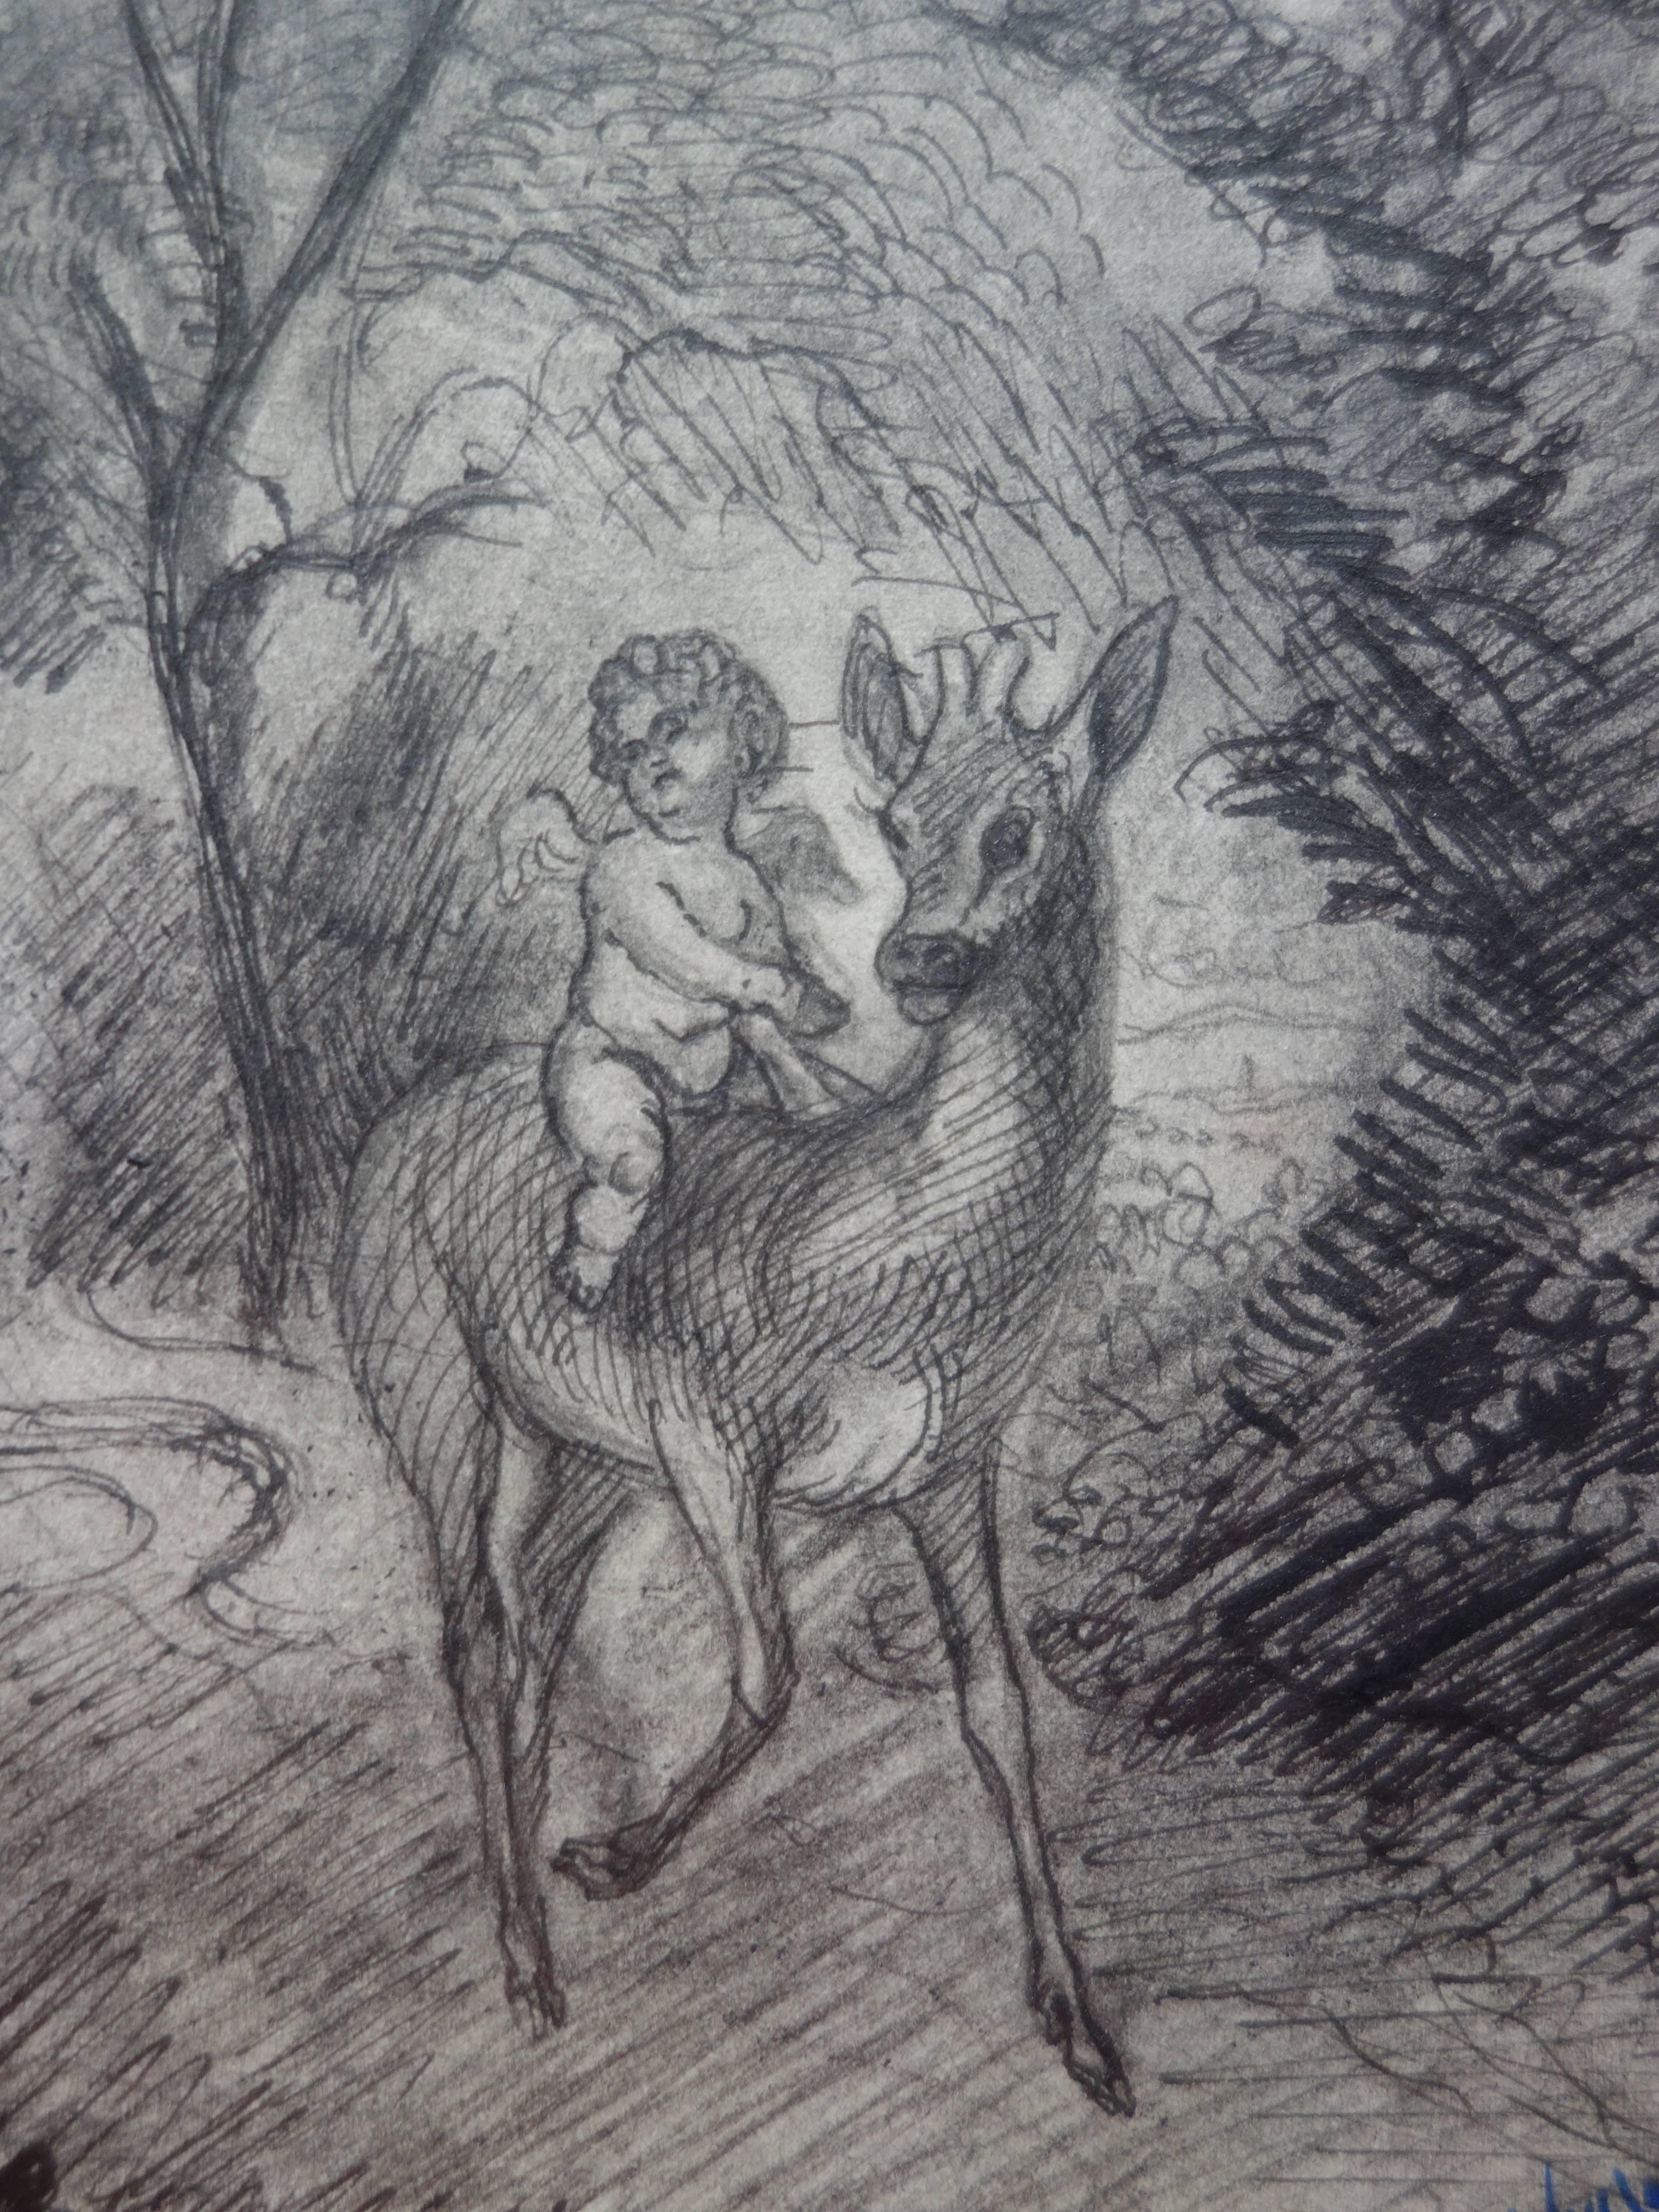 Angel Riding a Deer - Original pencil and ink drawing - Signed - Art by Demetrios Galanis